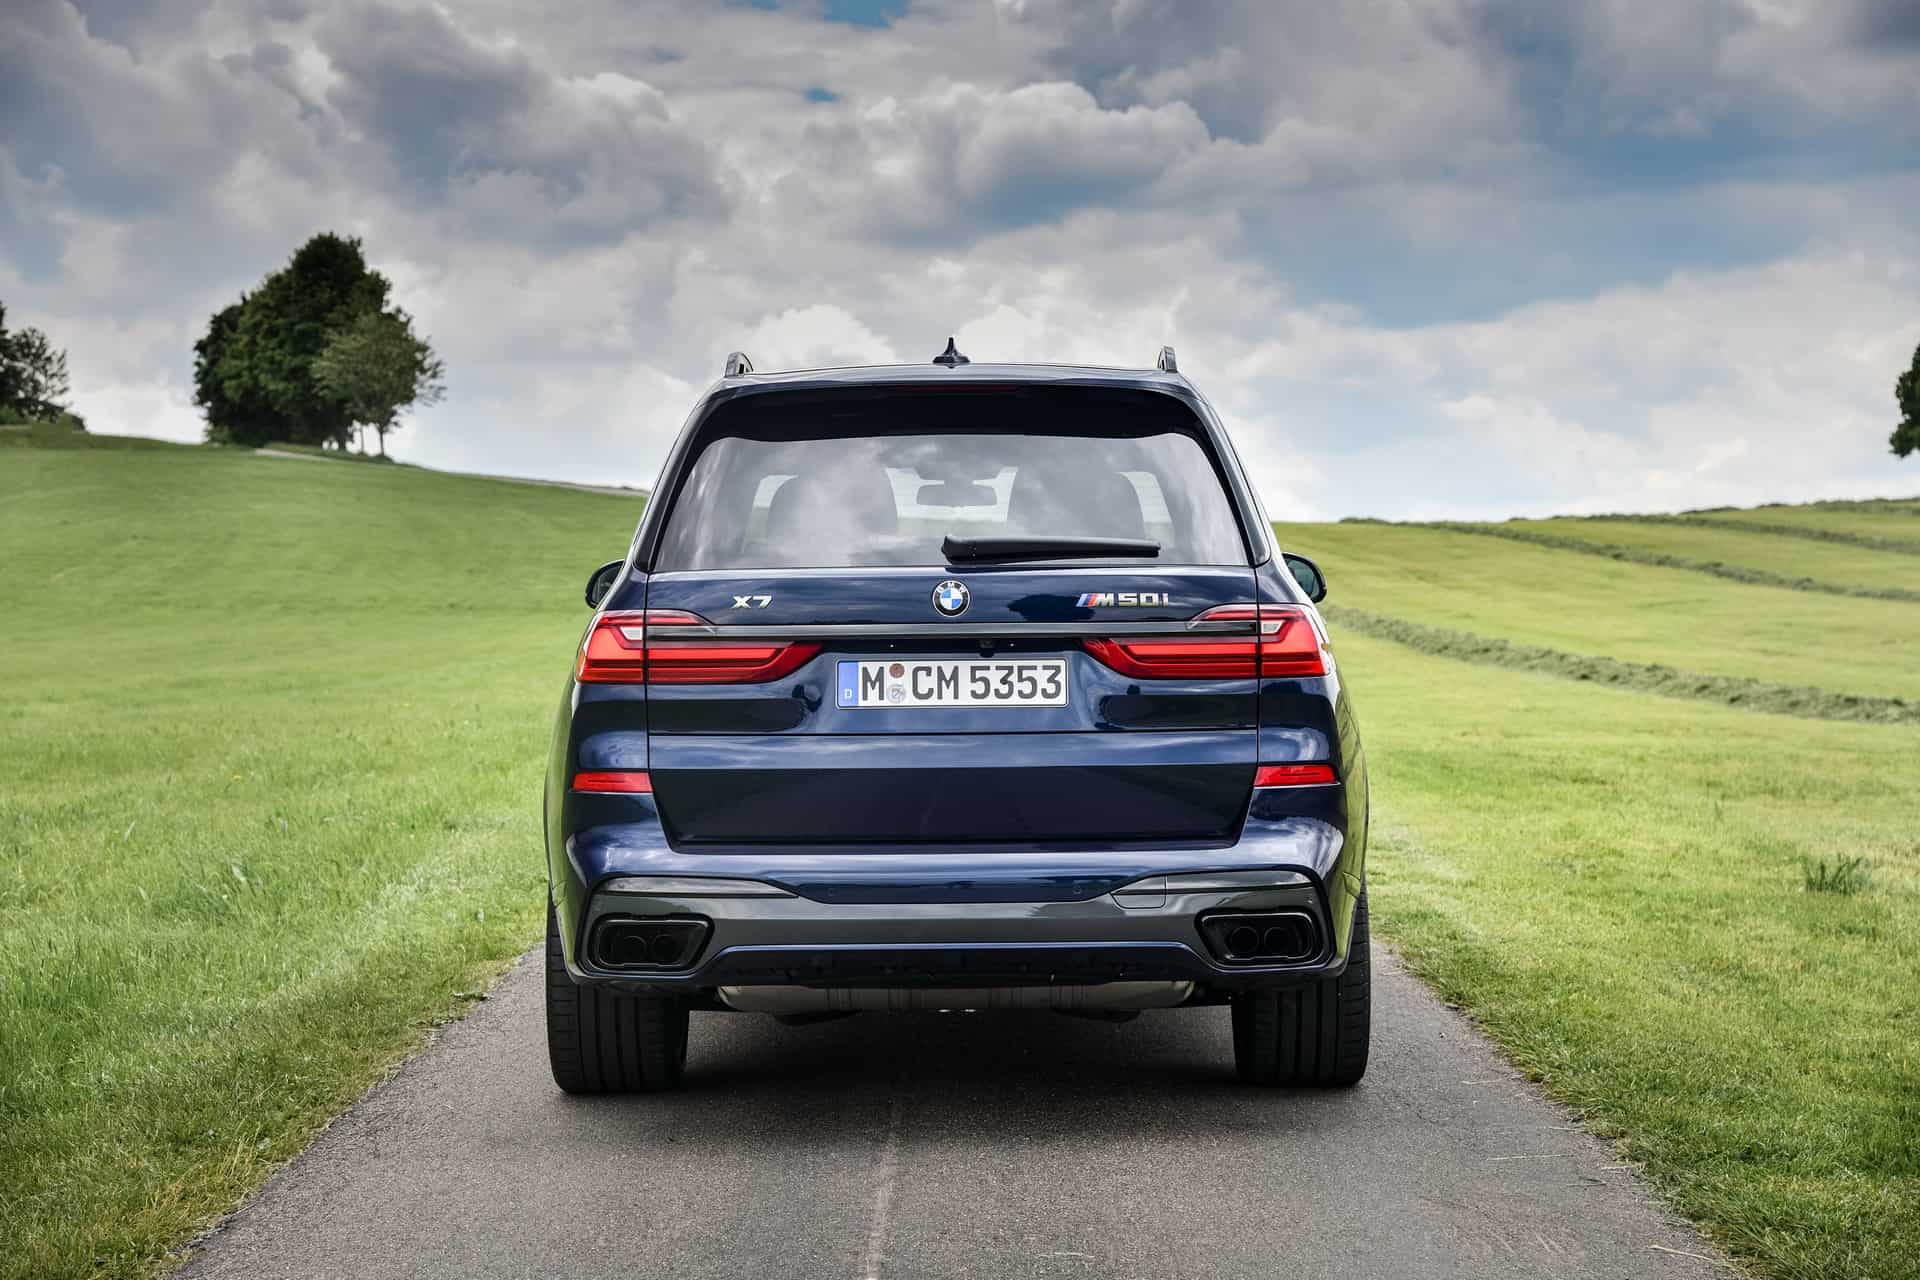 C&D Proves the BMW X7 M50i is a Capable Towing Machine